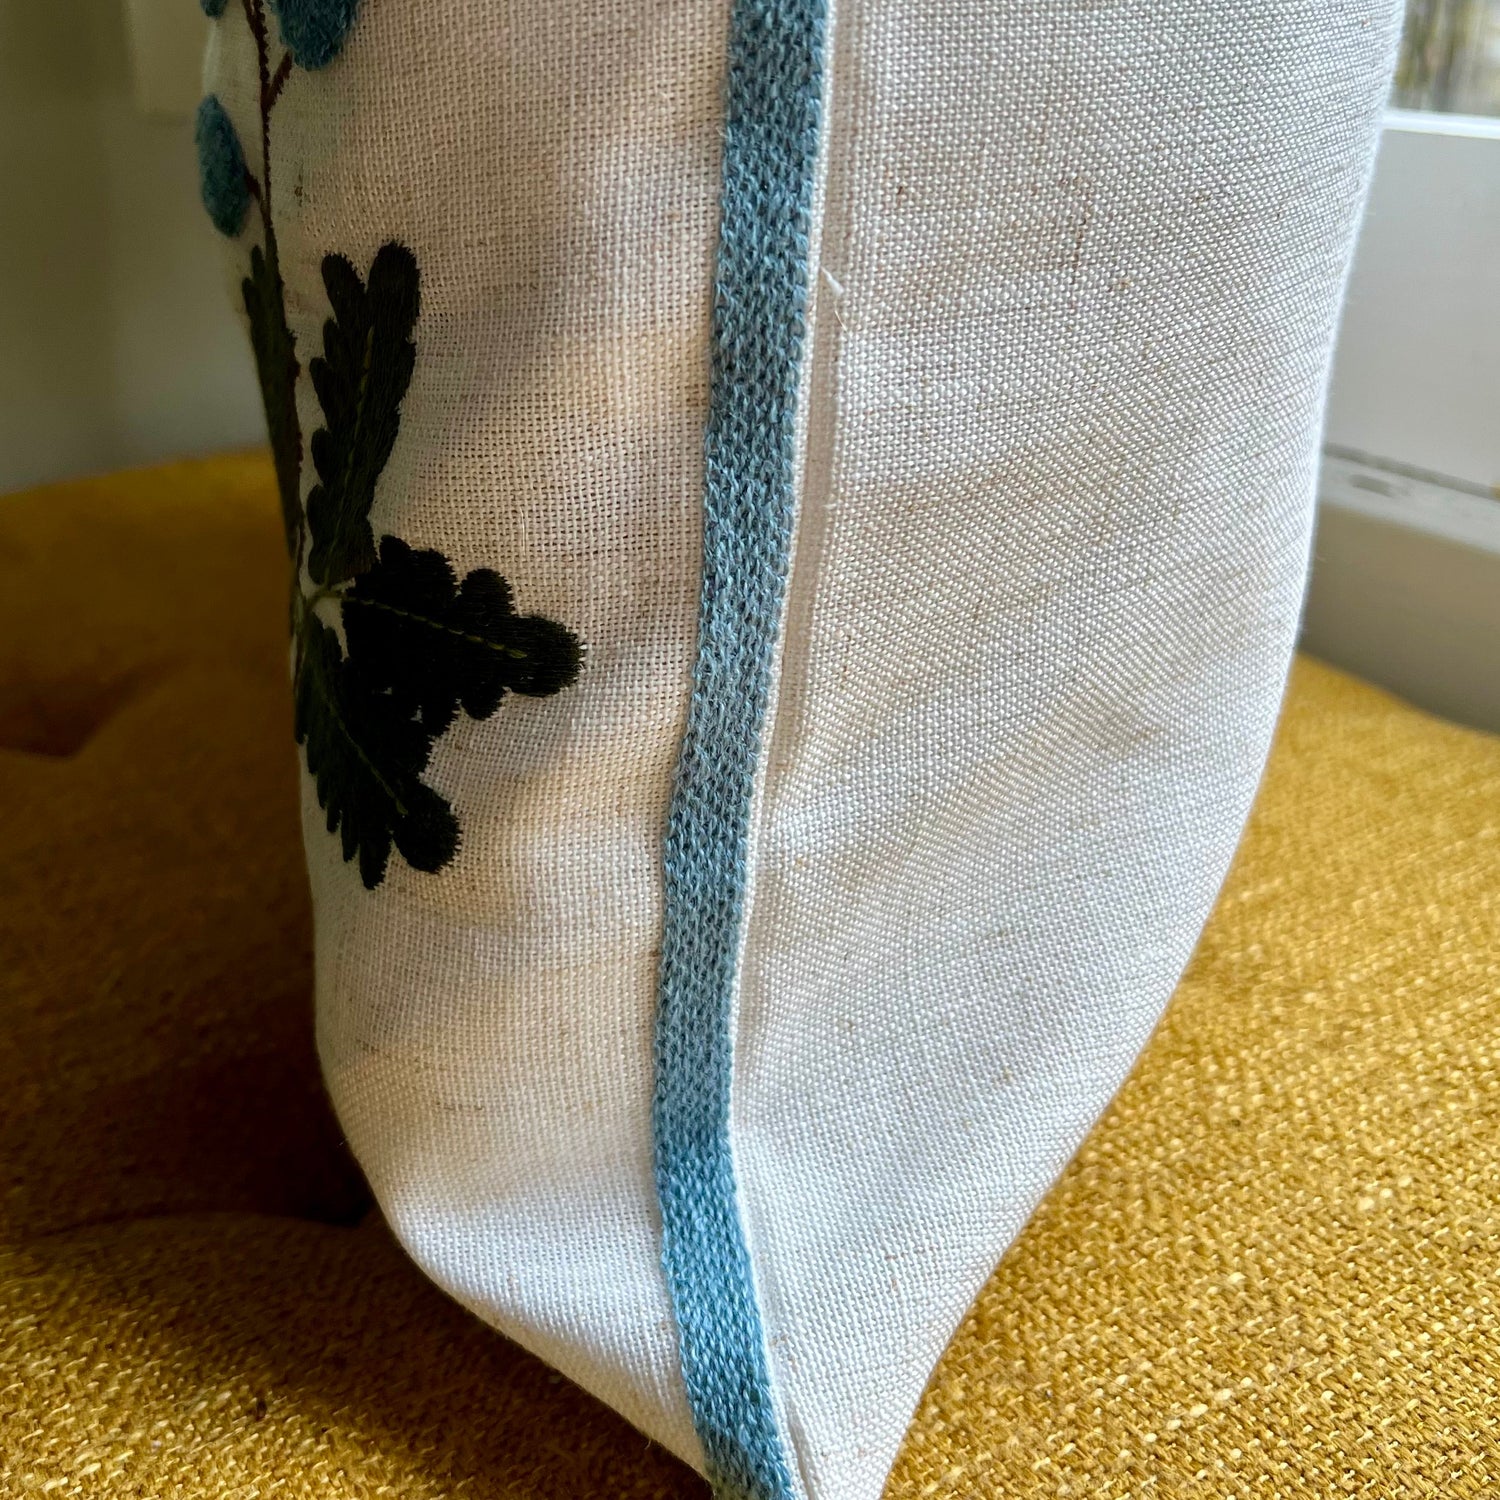 Blue Wildflower Embroidered Pillow Cover